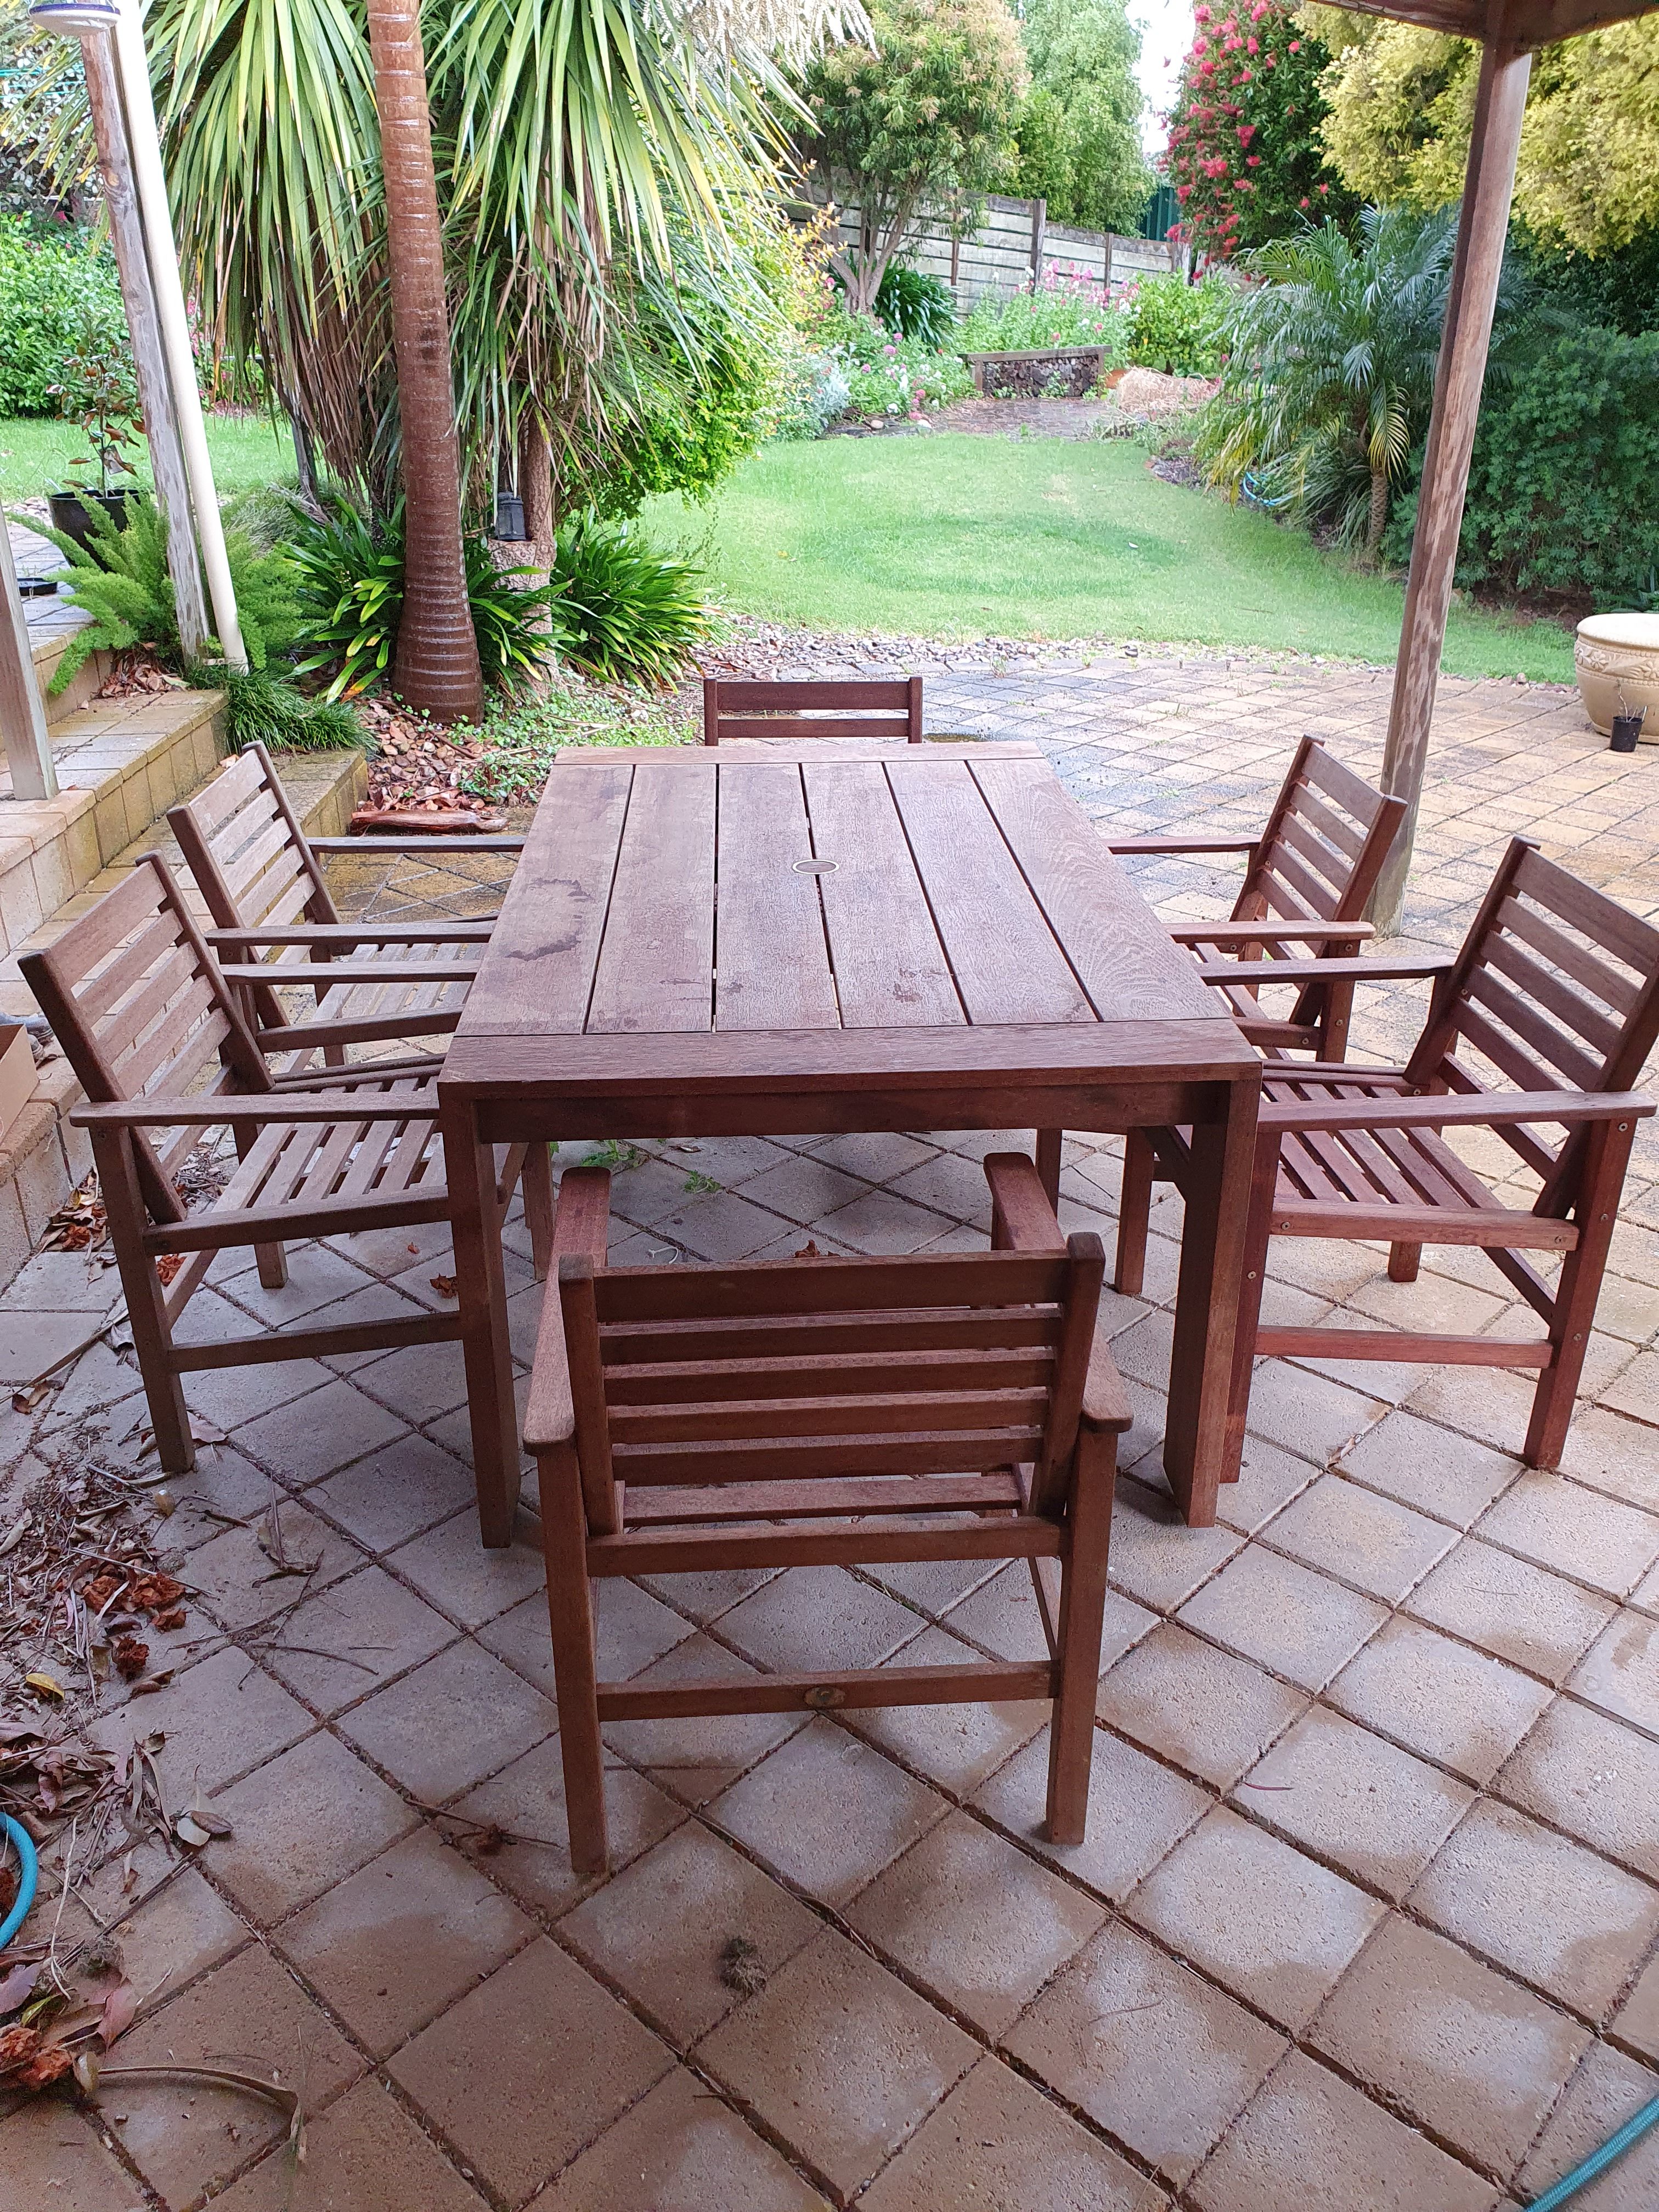 Teak Oil - The best oil for garden furniture and outdoor wood